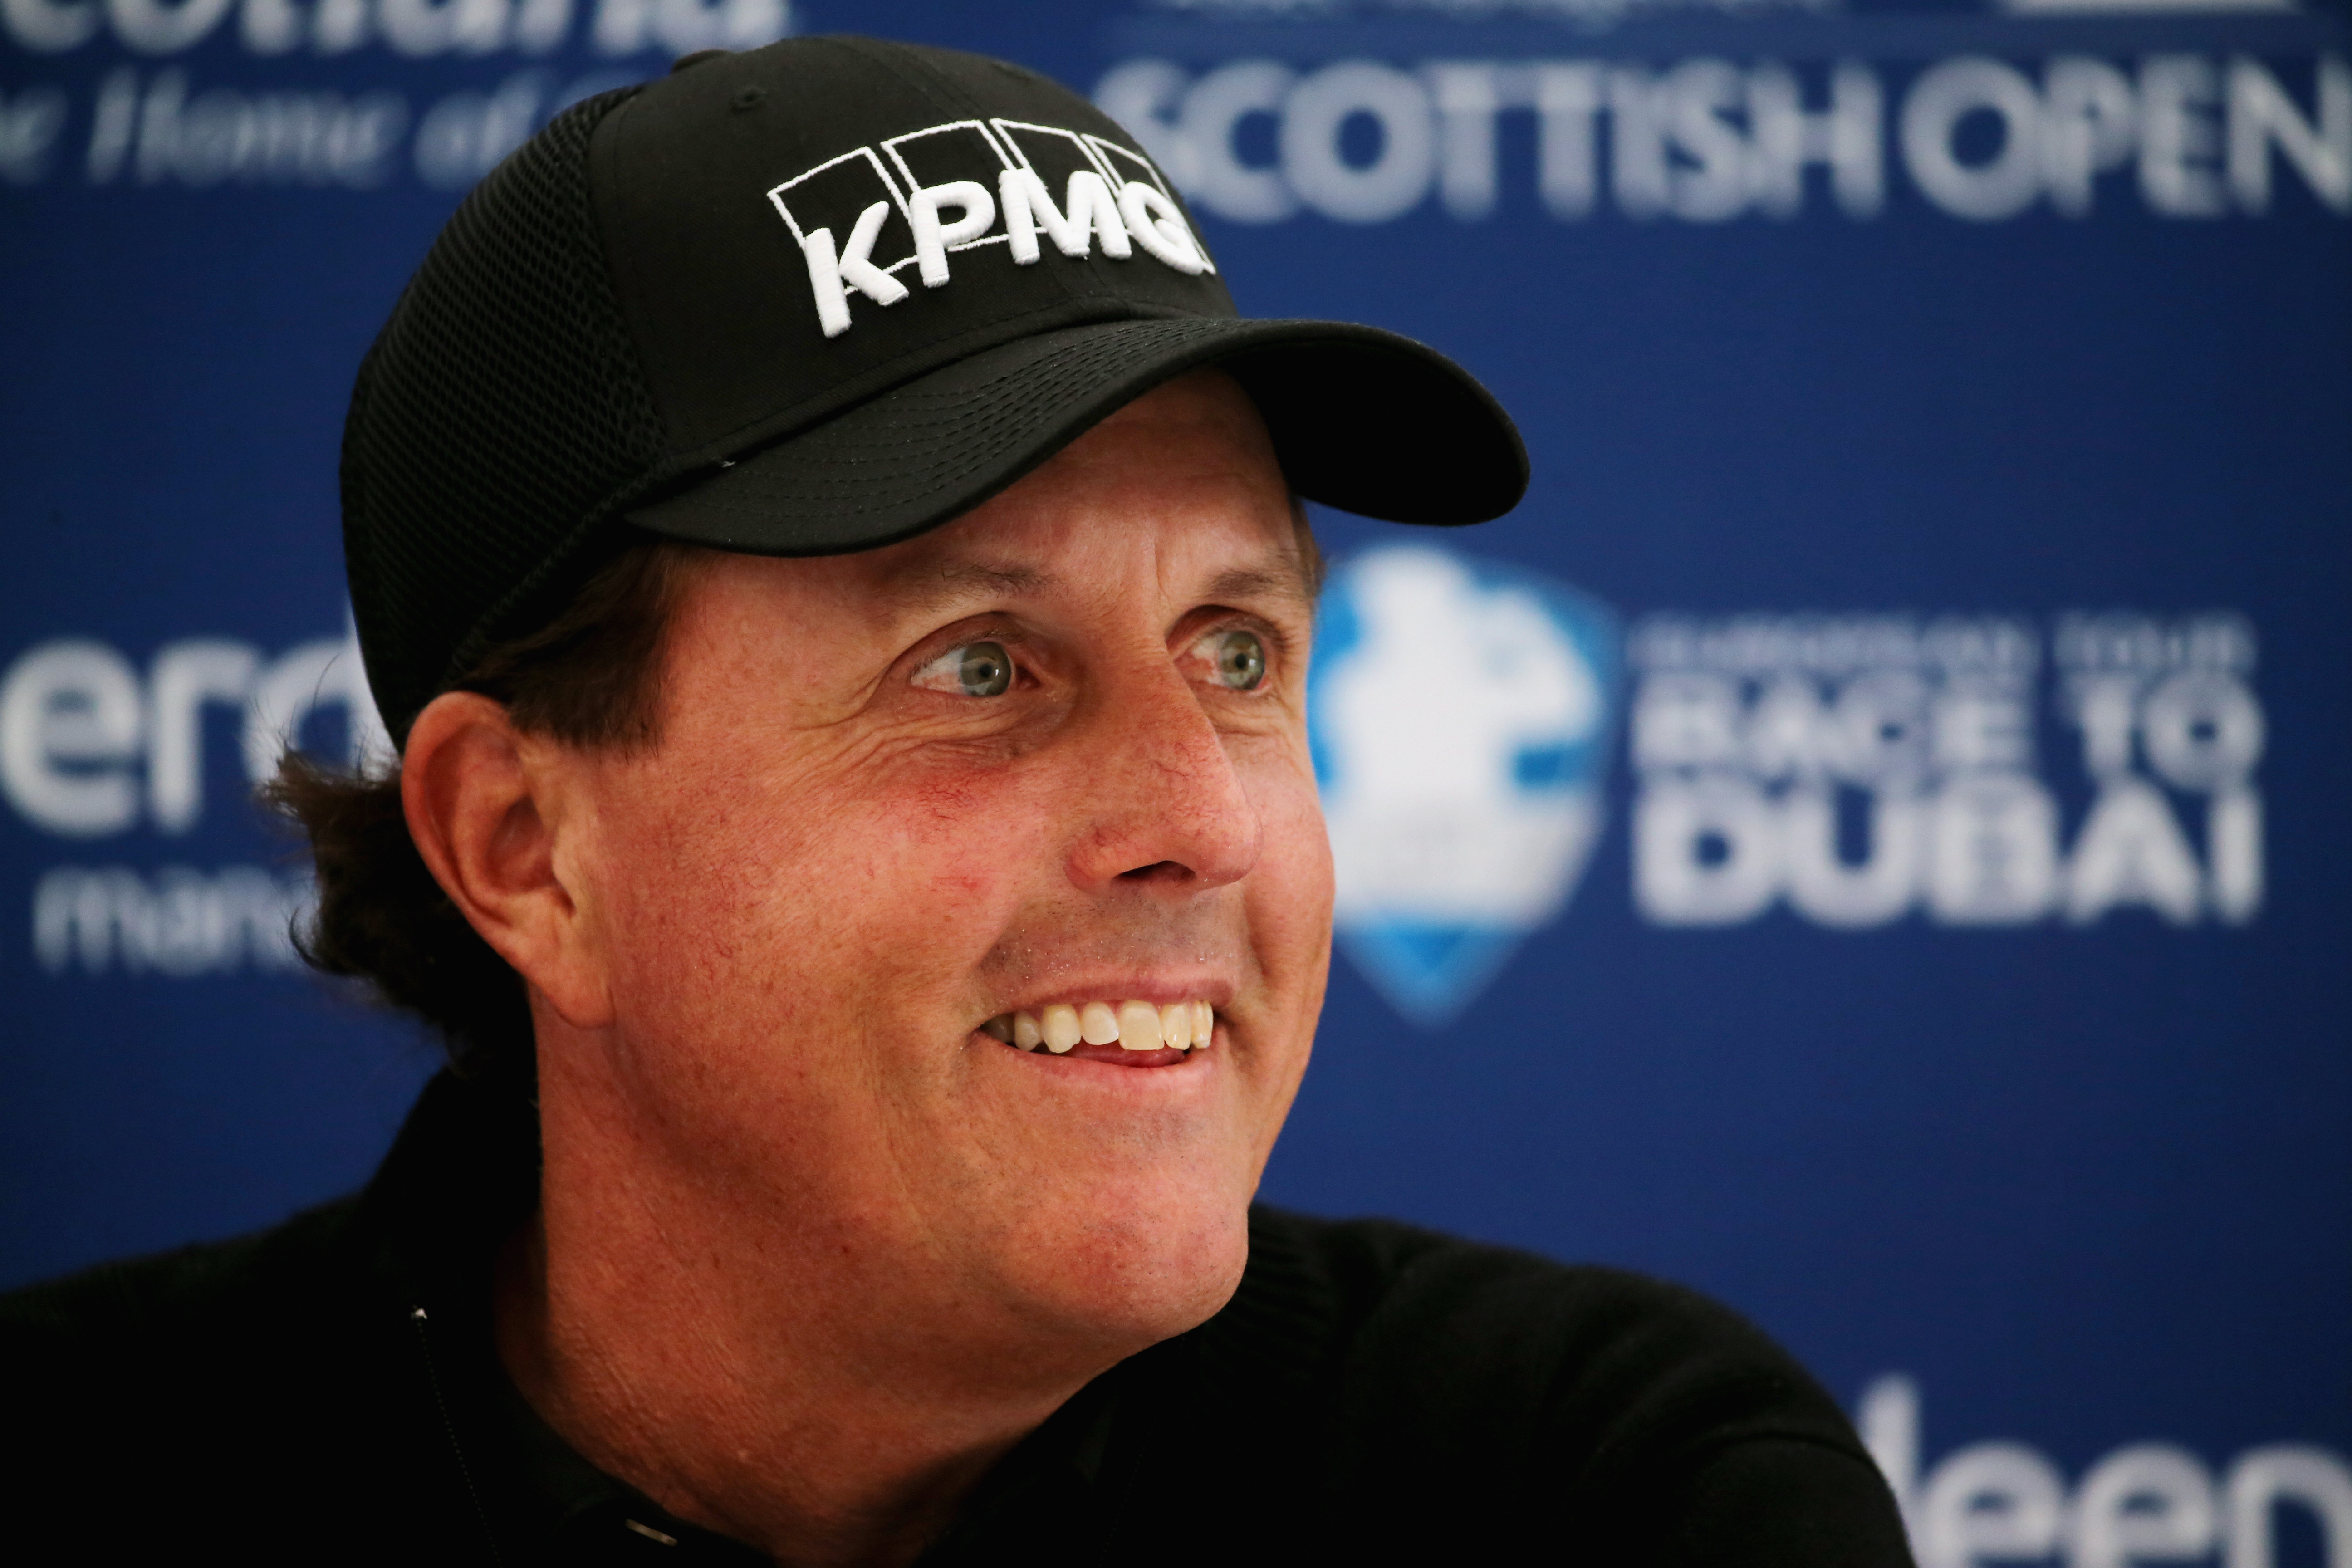 Mickelson praised Trump's contribution to golf, but criticised his comments on Mexican immigrants (Photo: Getty Images)